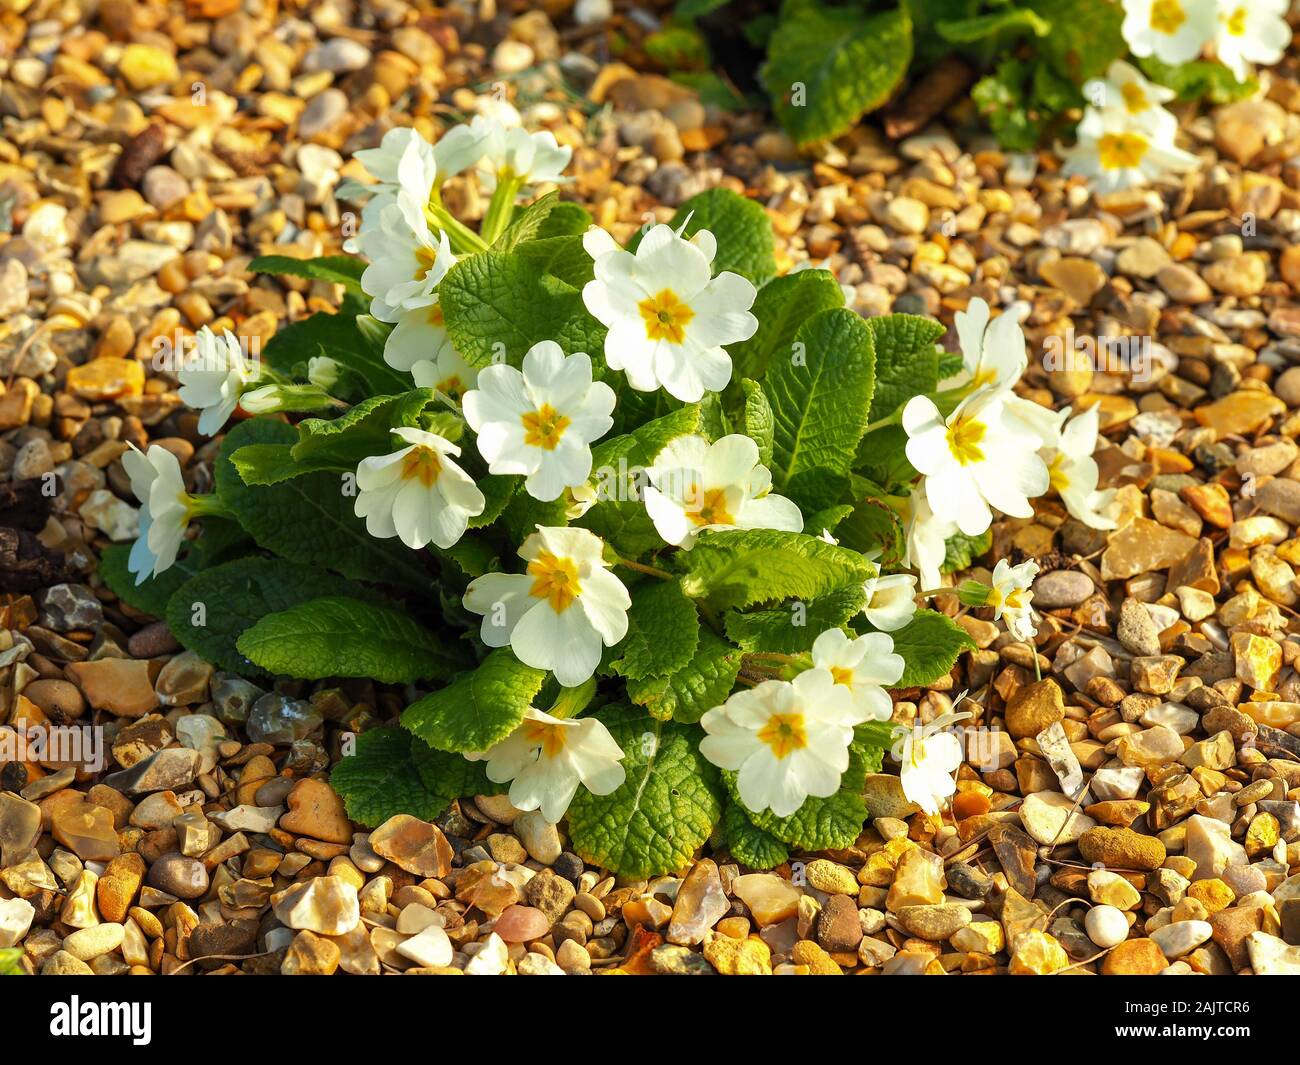 Primula plant with white flowers and green leaves flowering in a garden in a gravel bed Stock Photo